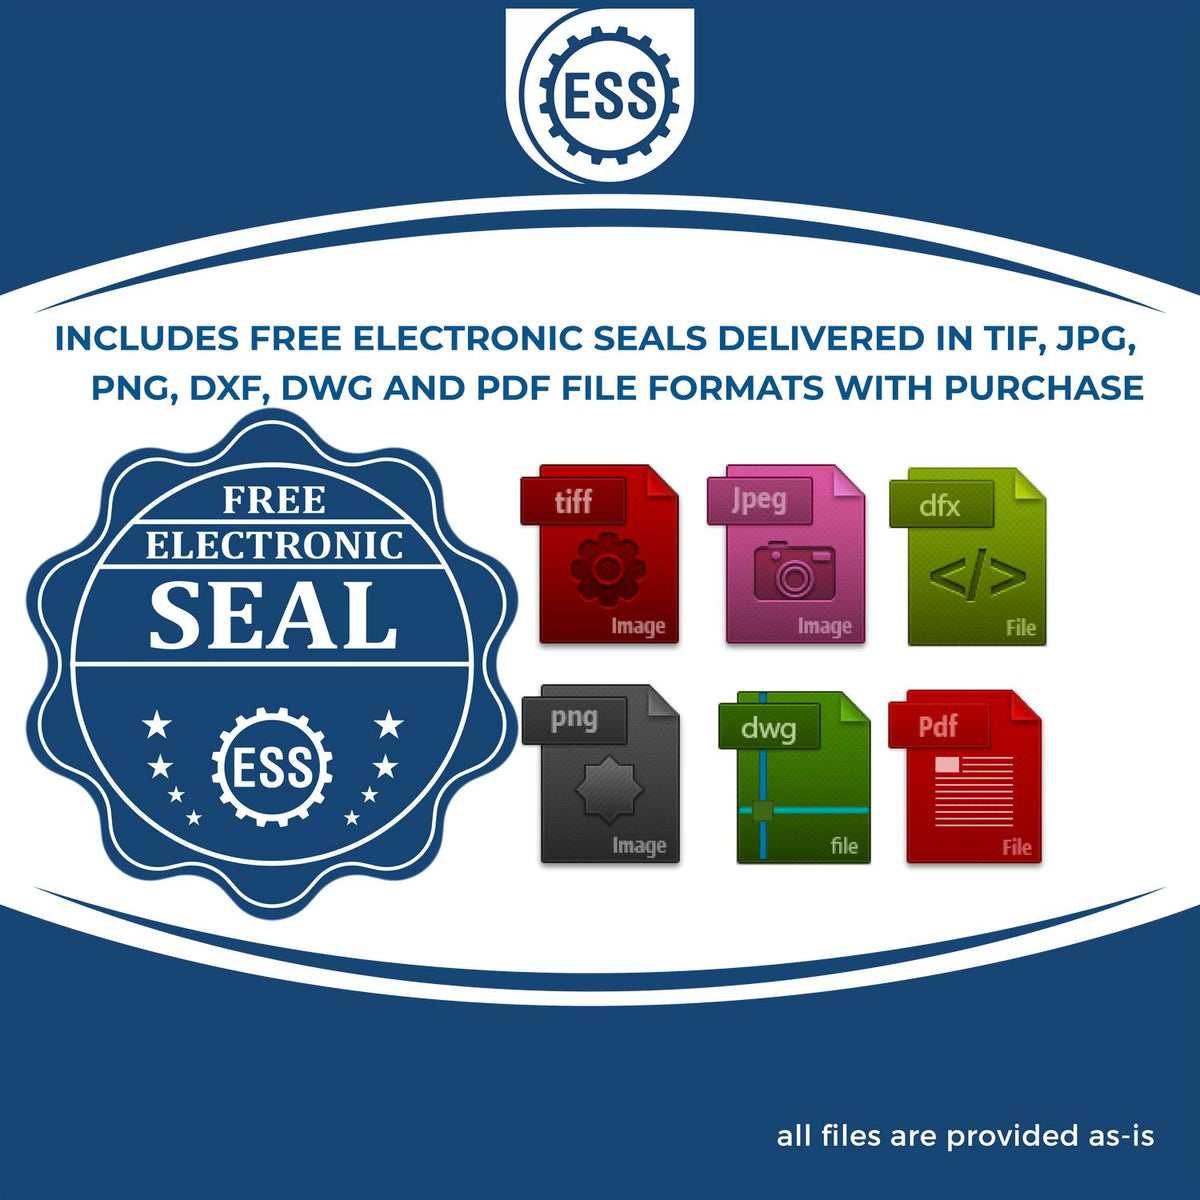 An infographic for the free electronic seal for the Oklahoma Engineer Desk Seal illustrating the different file type icons such as DXF, DWG, TIF, JPG and PNG.